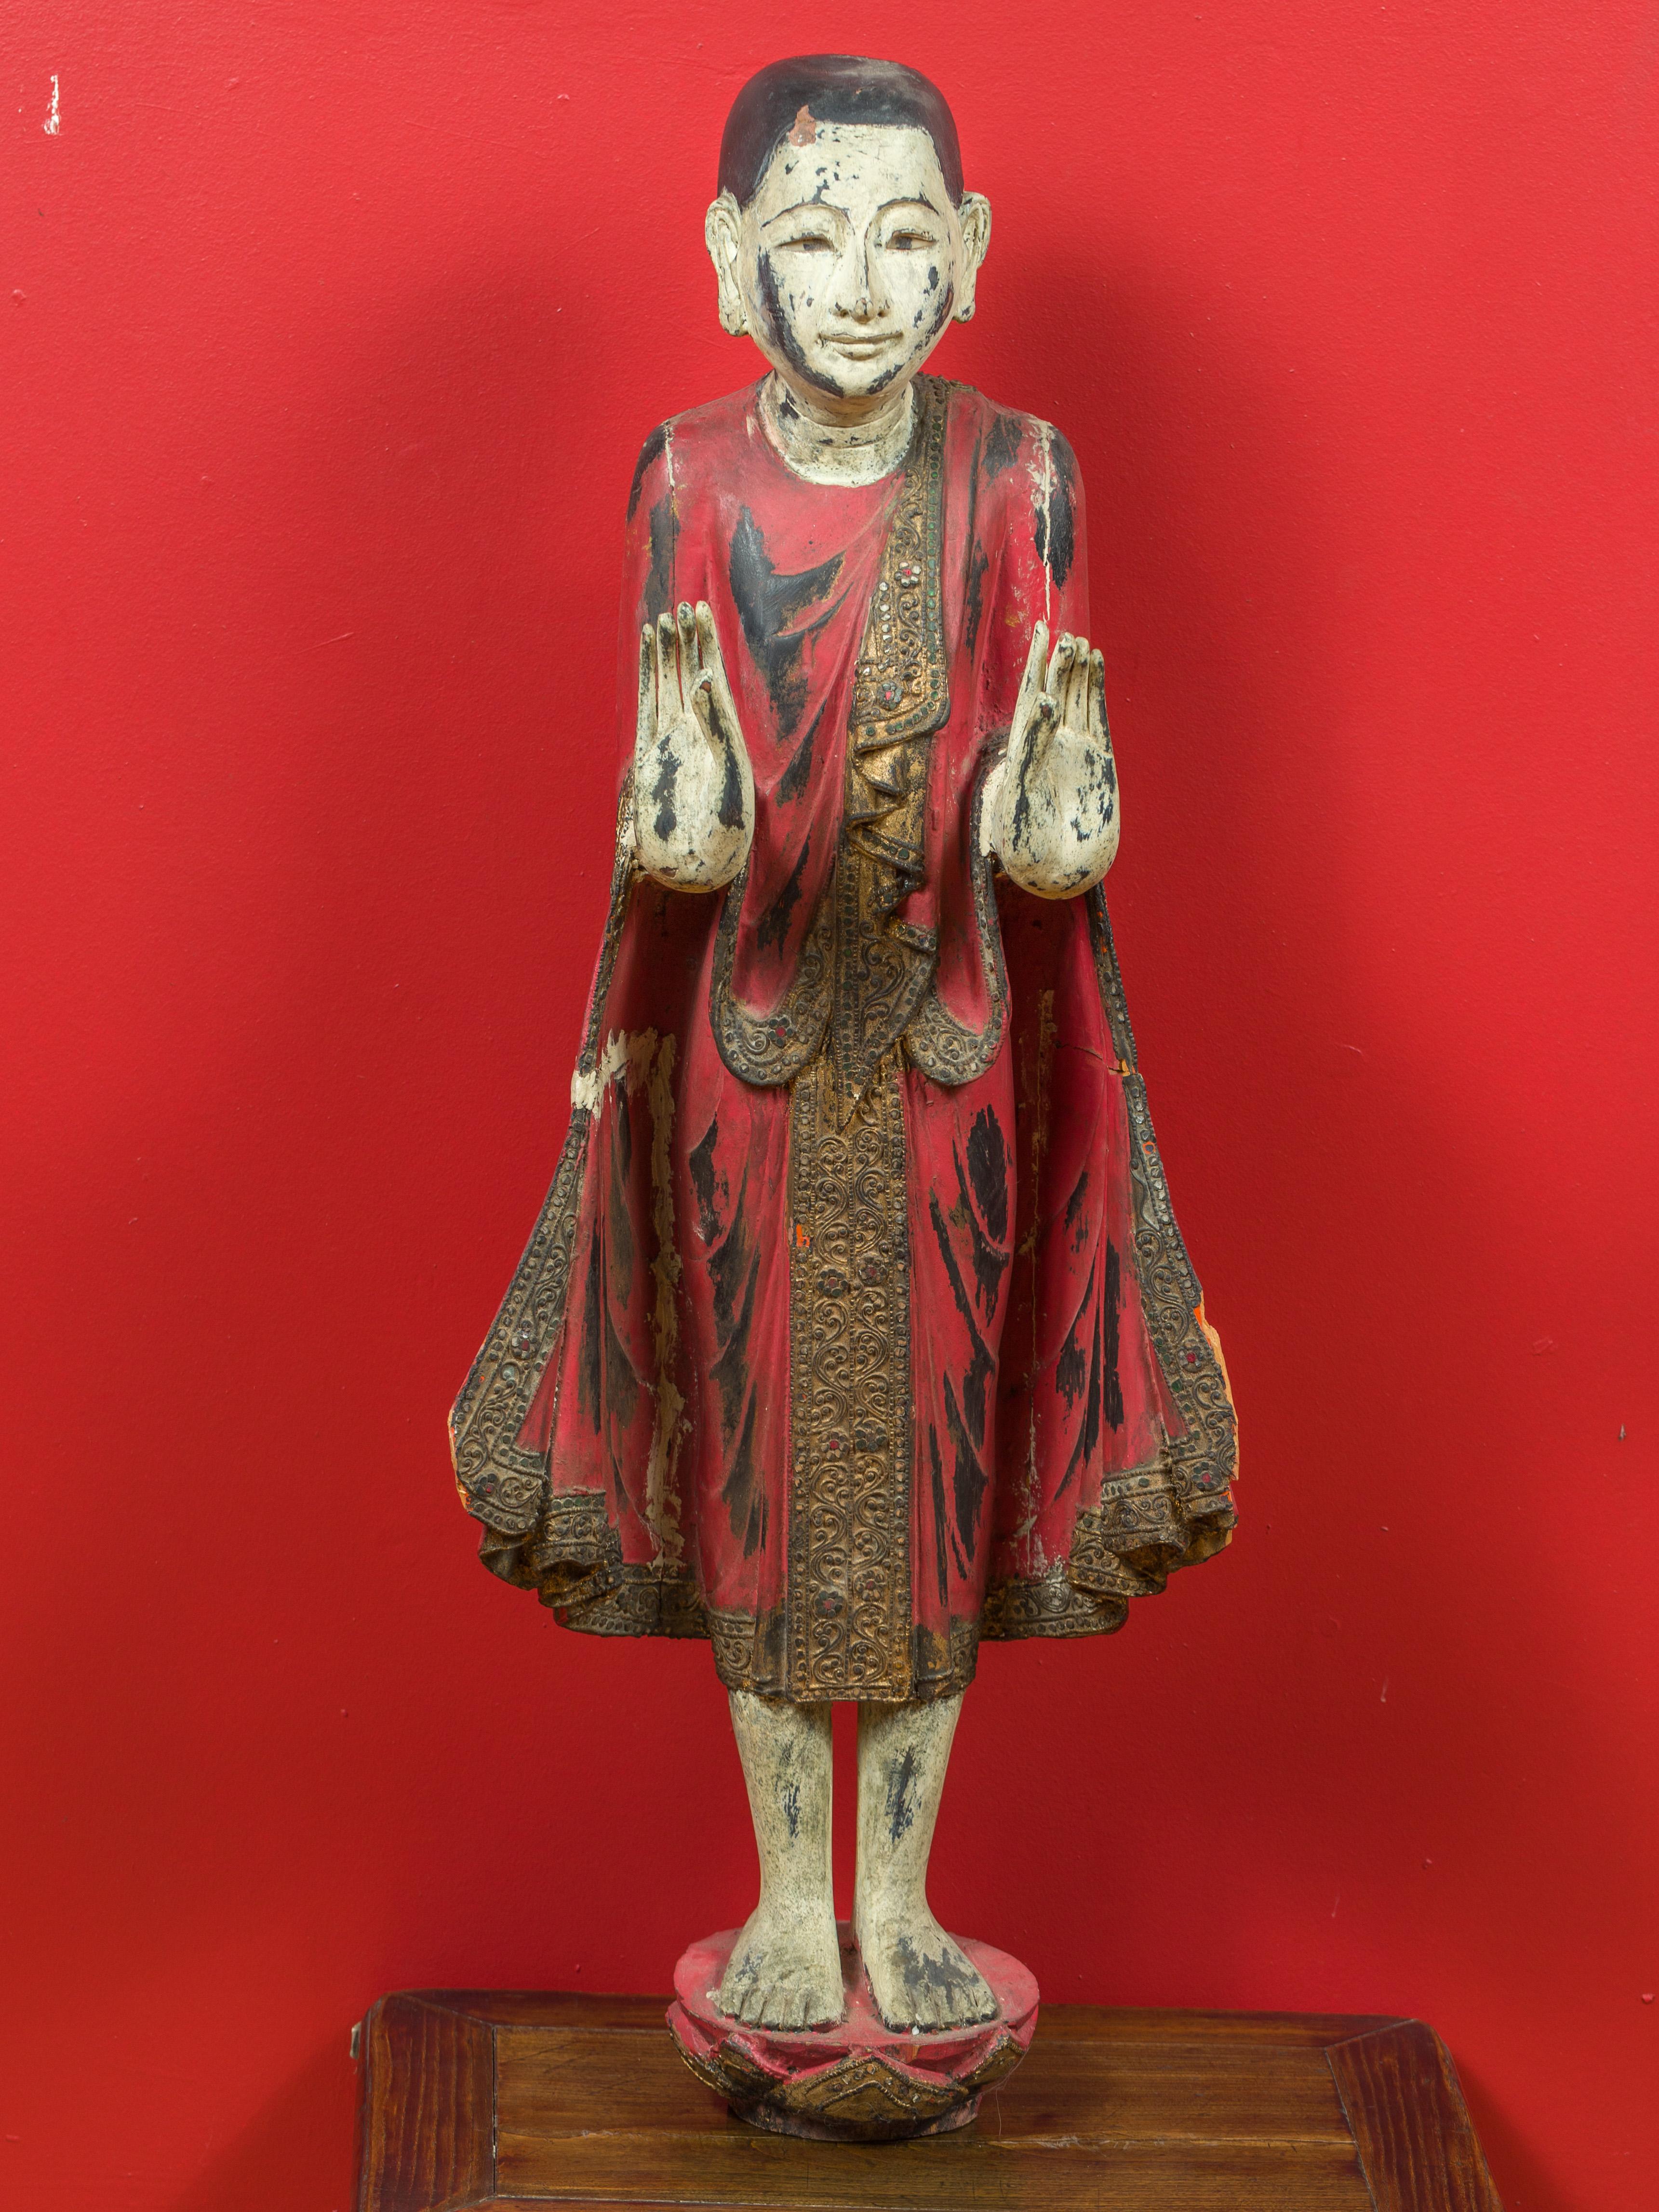 A vintage Thai carved wooden monk statue with red, black and gilt finish, inlaid mica and Abhaya Mudra (fear dispelling) gesture. Immerse yourself in the serene beauty of this vintage Thai carved wooden monk statue, a remarkable piece from Thailand.